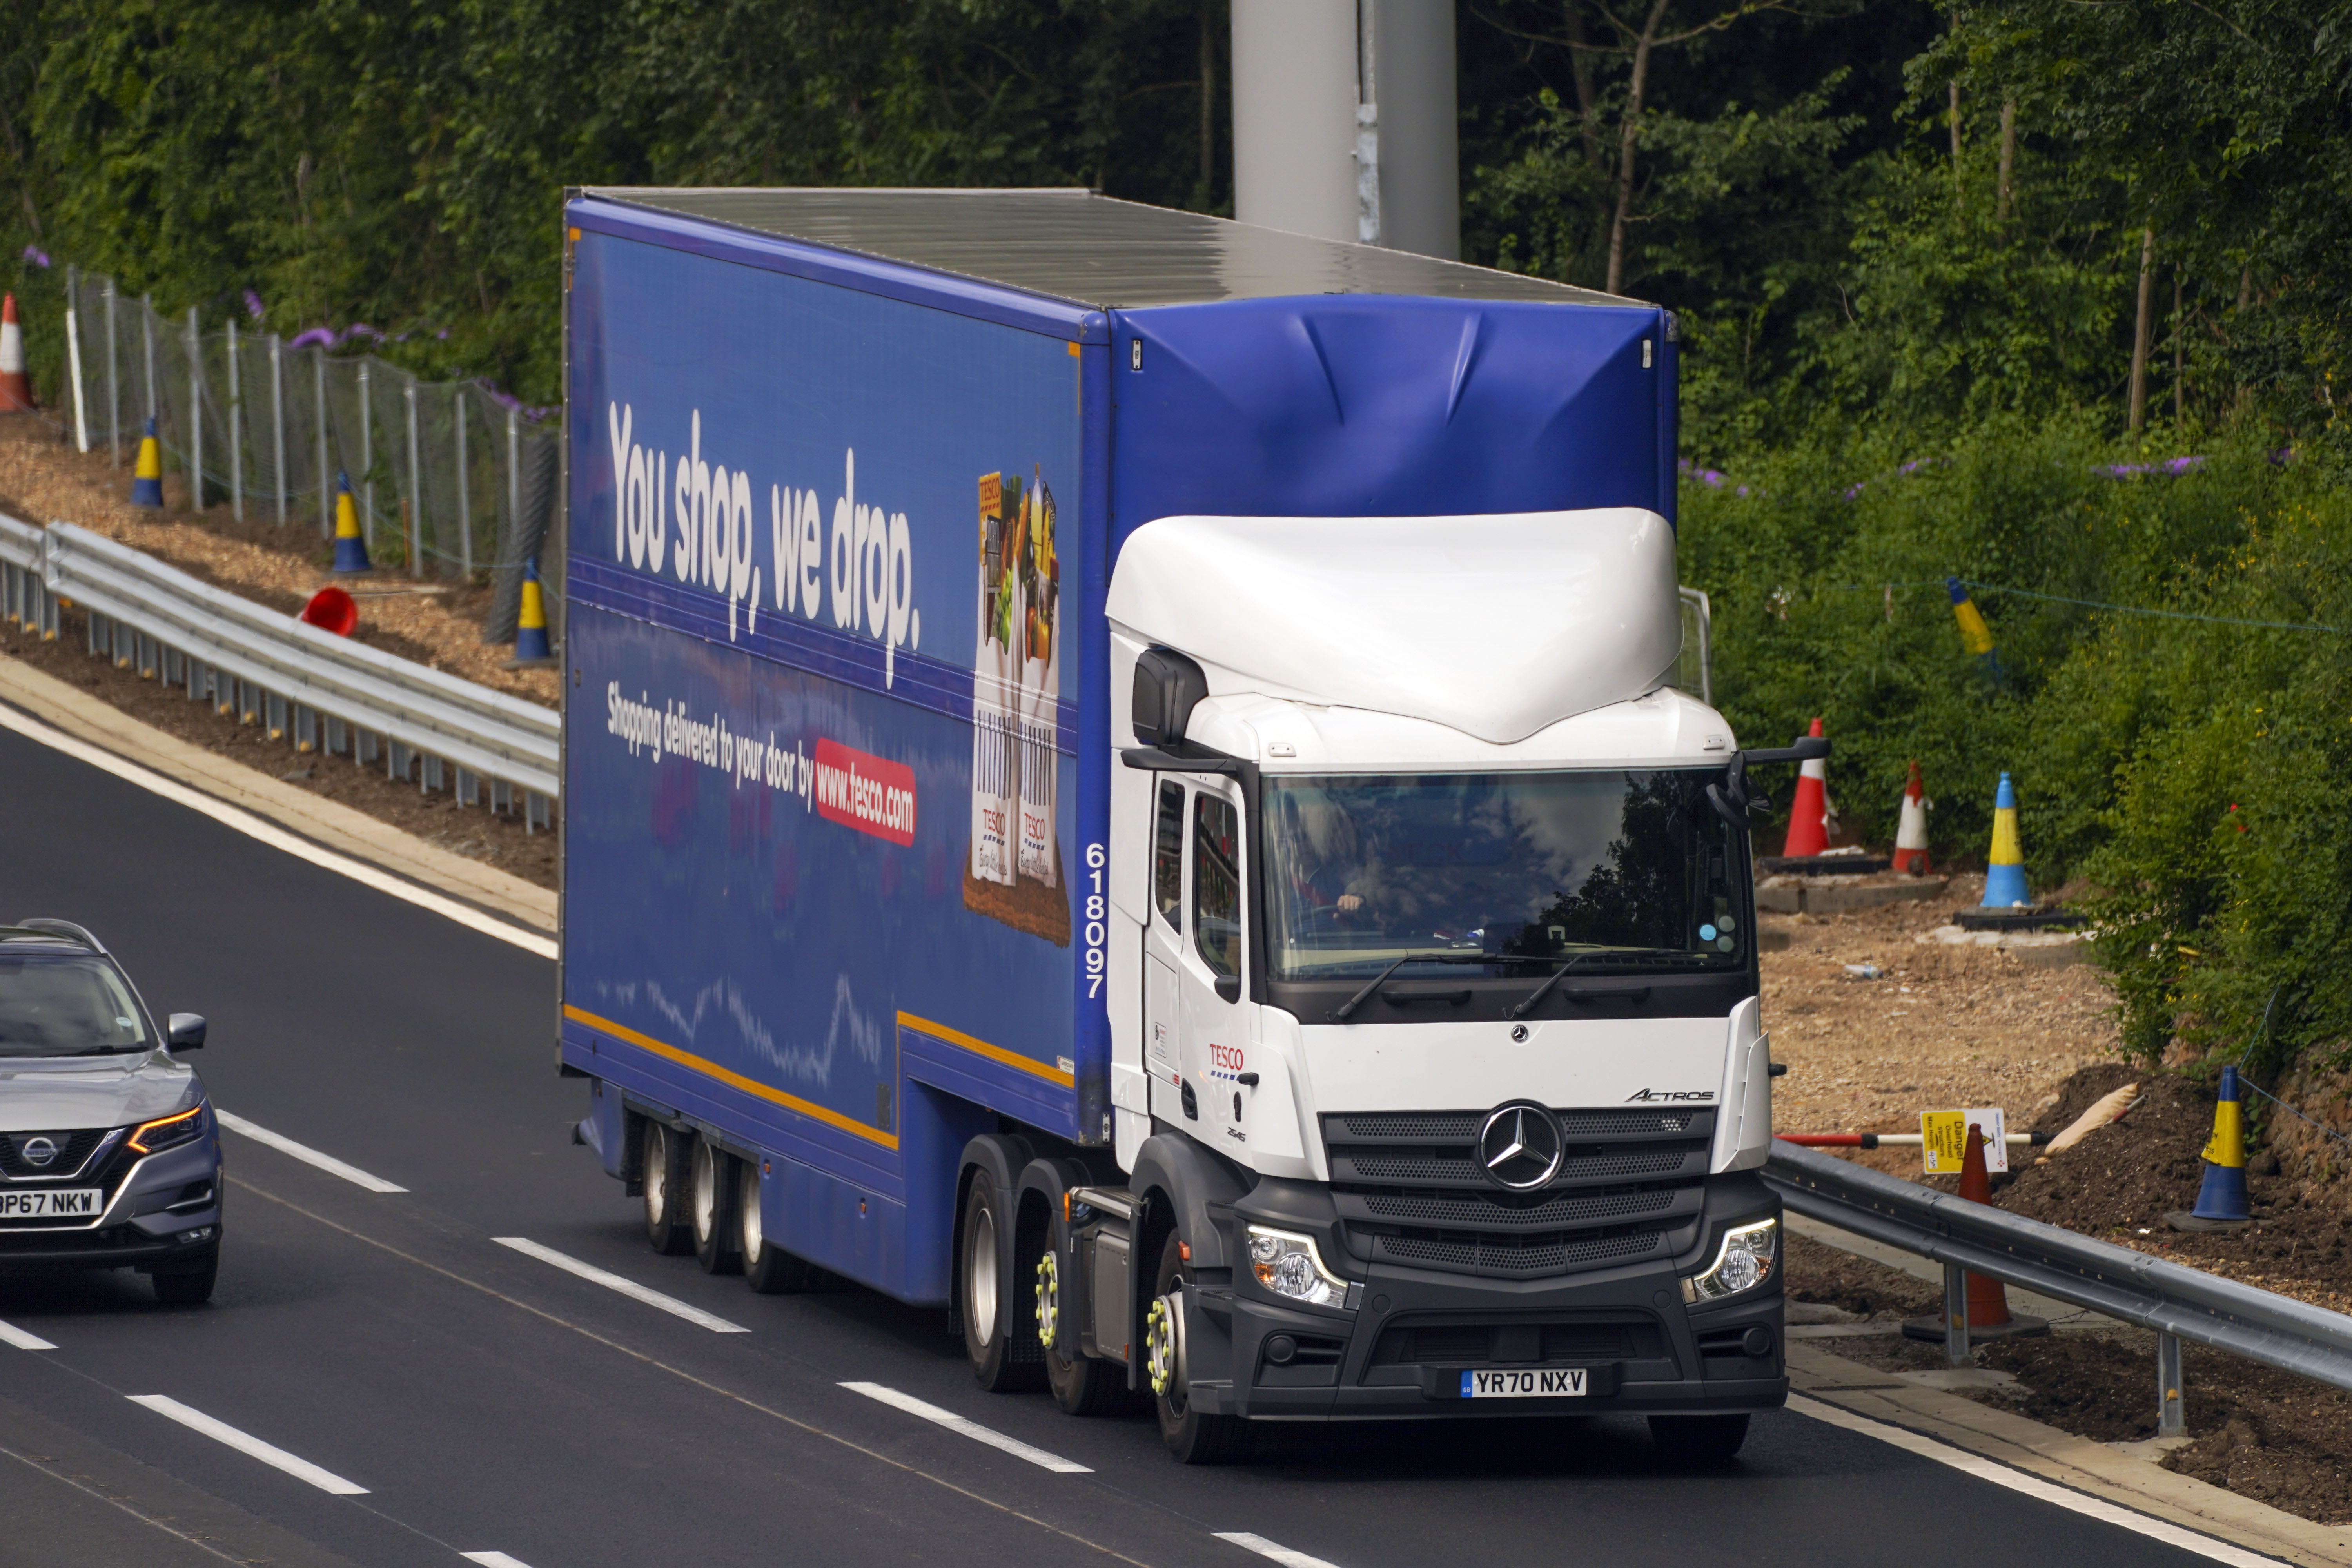 An HGV driver shortage is hitting deliveries across the UK, leading to some businesses paying bonuses